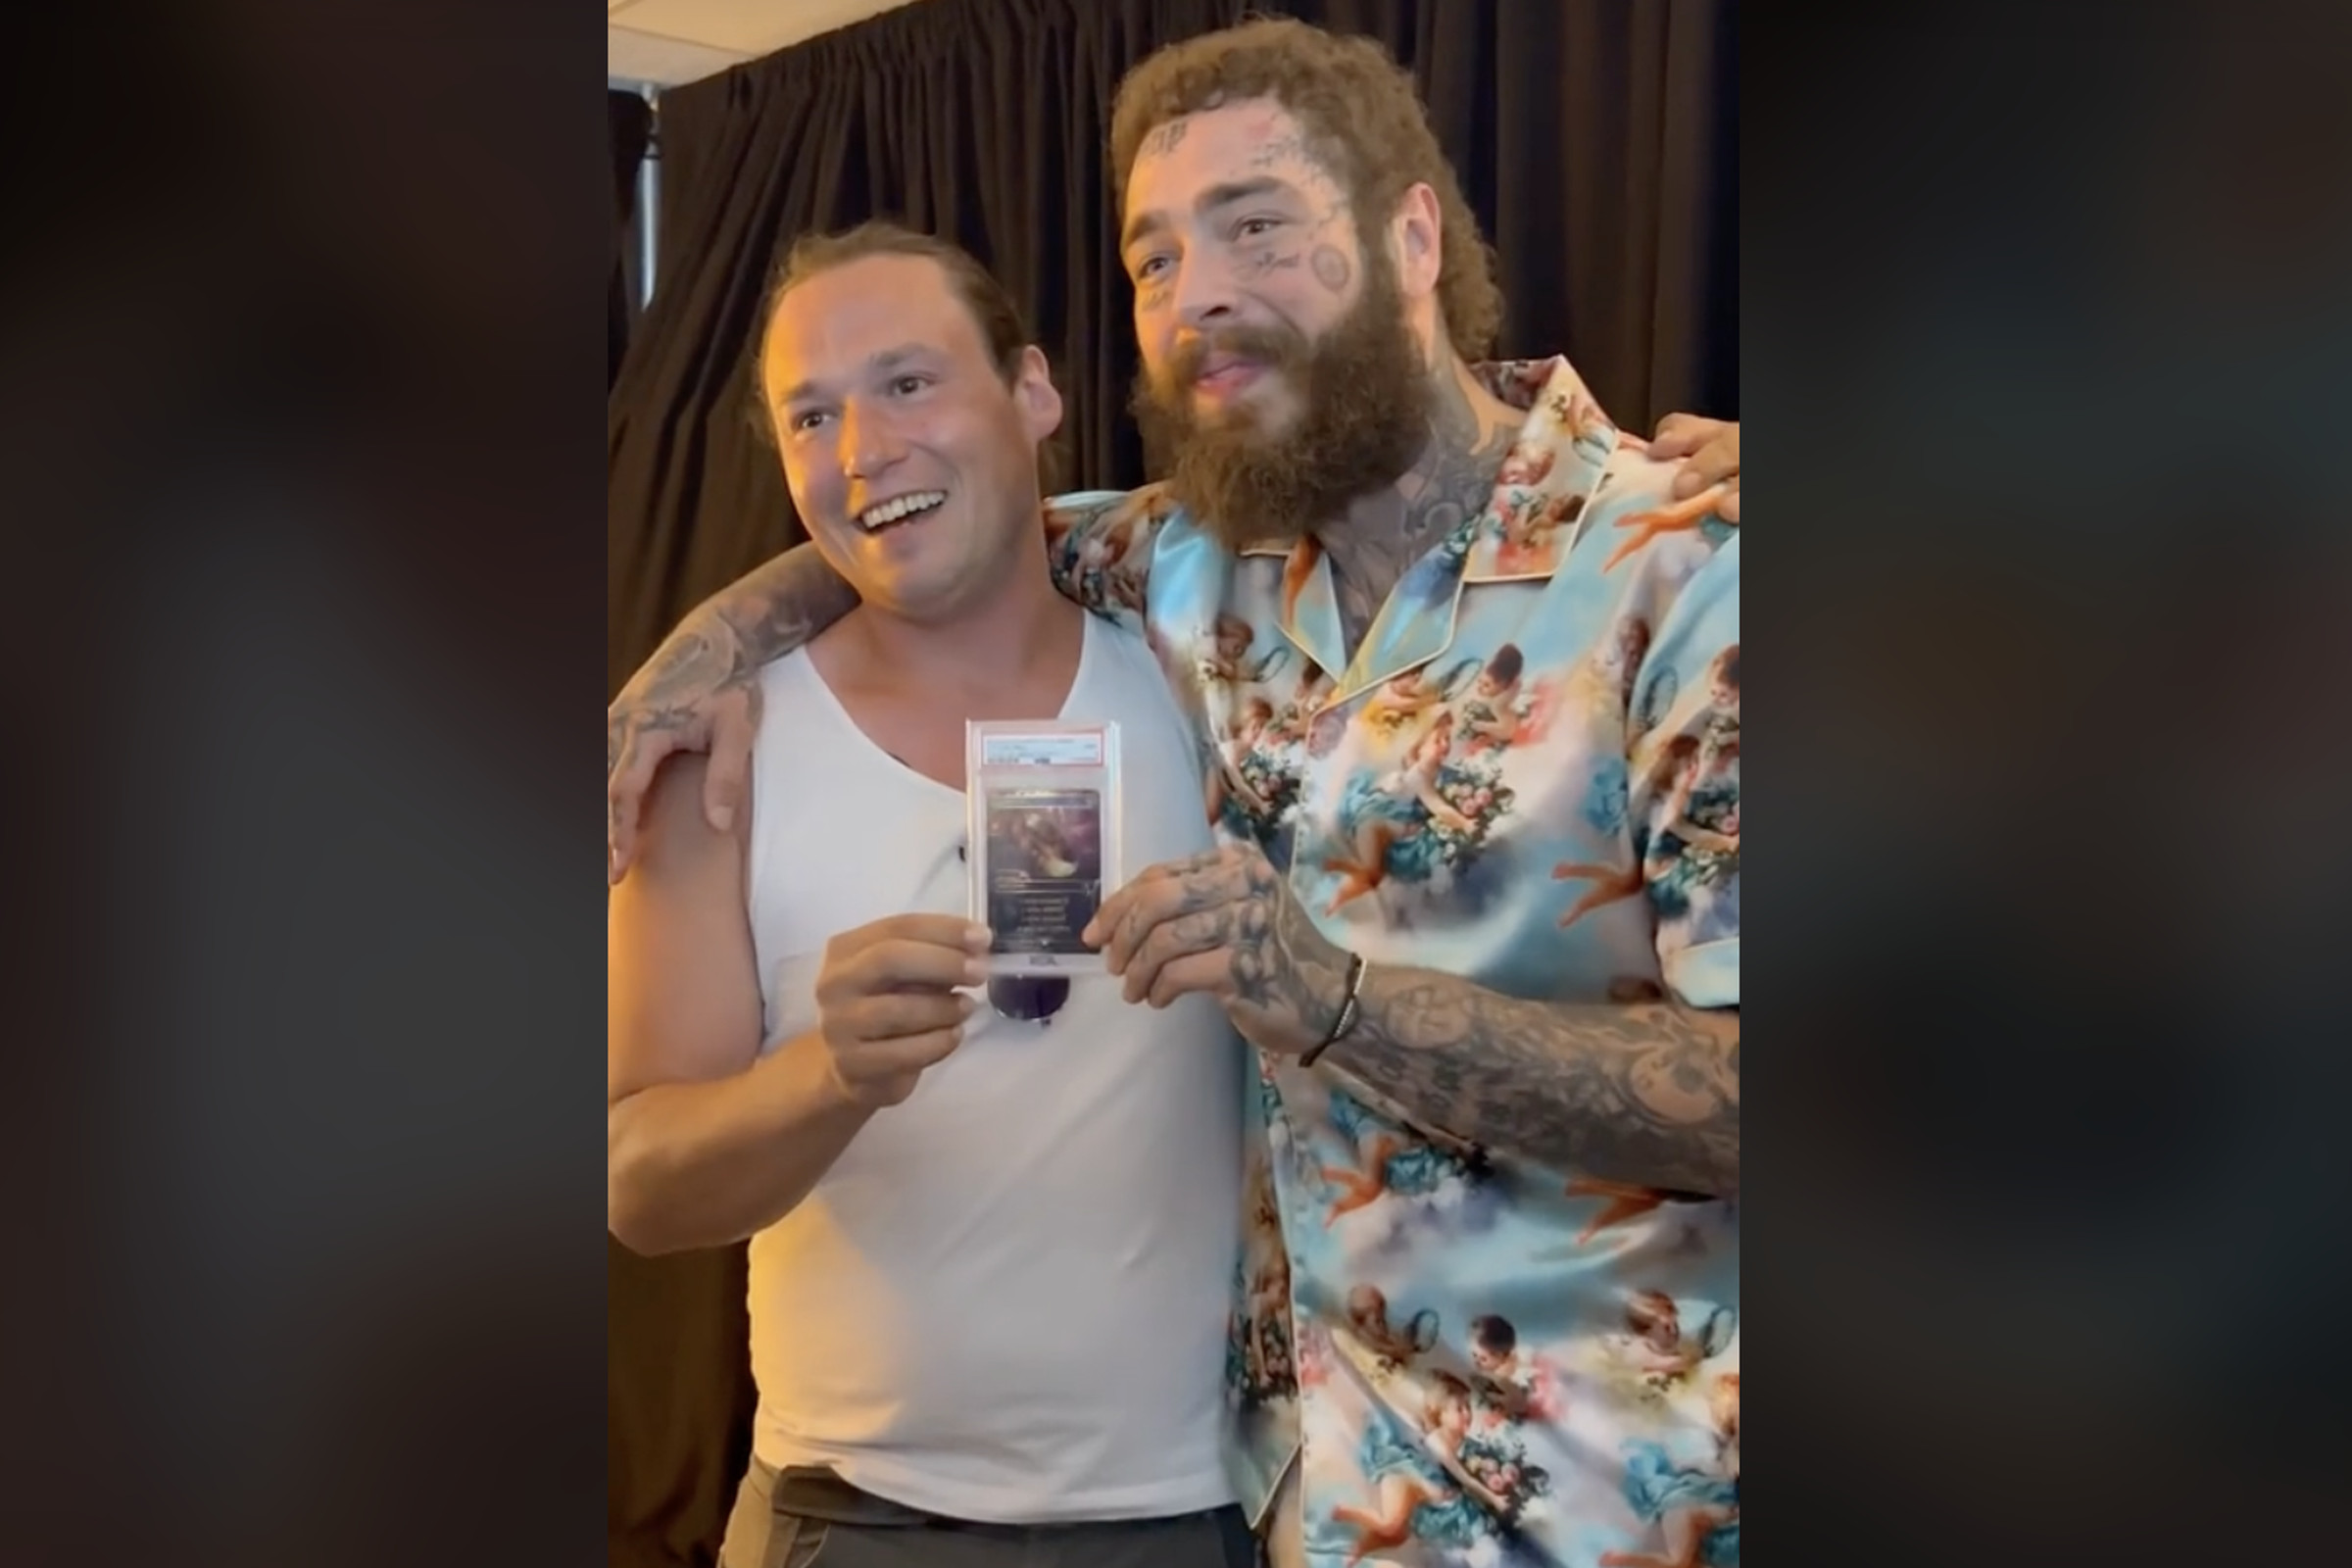 Screenshot from a TikTok video of rapper Post Malone and Brook Trafton posing together jointly holding the sealed and vaulted one-of-one One Ring Magic: The Gathering card.